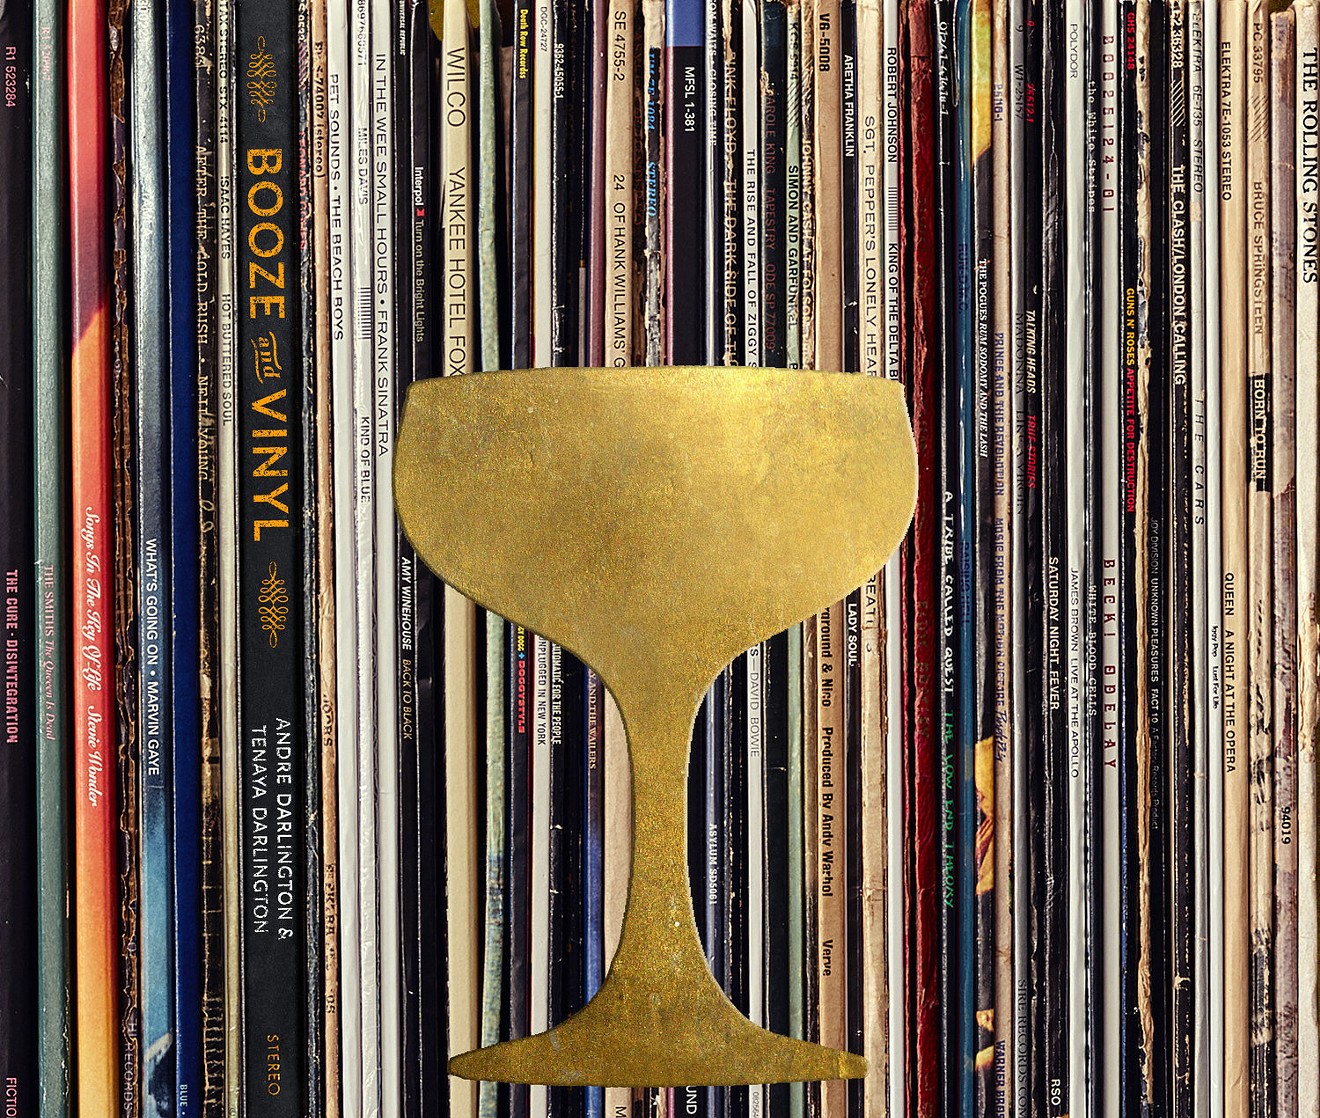 Booze & Vinyl can help you throw one hell of a party.